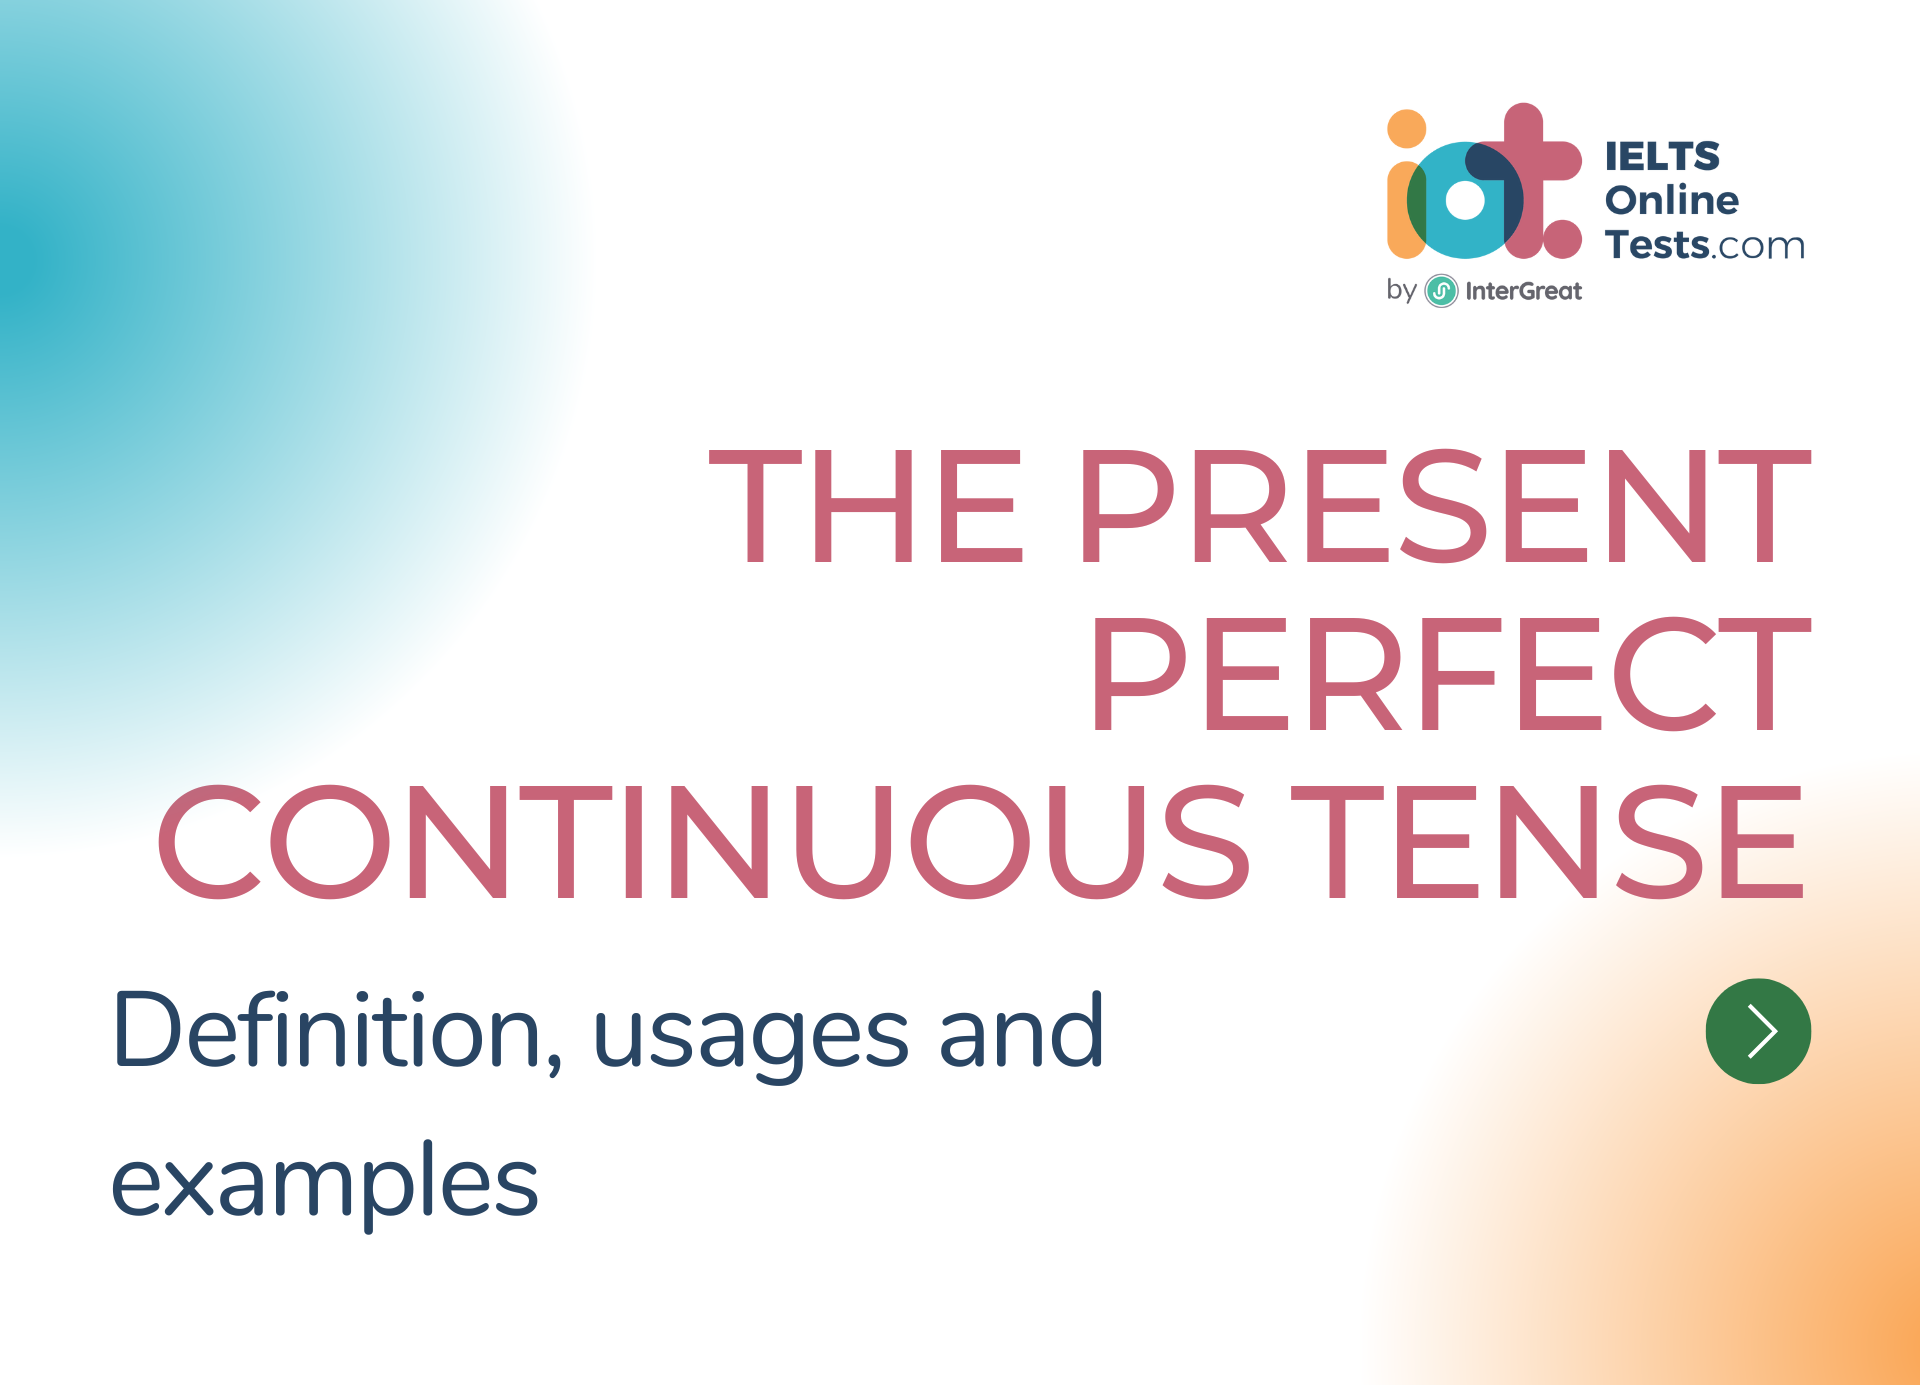 The present perfect continuous tense